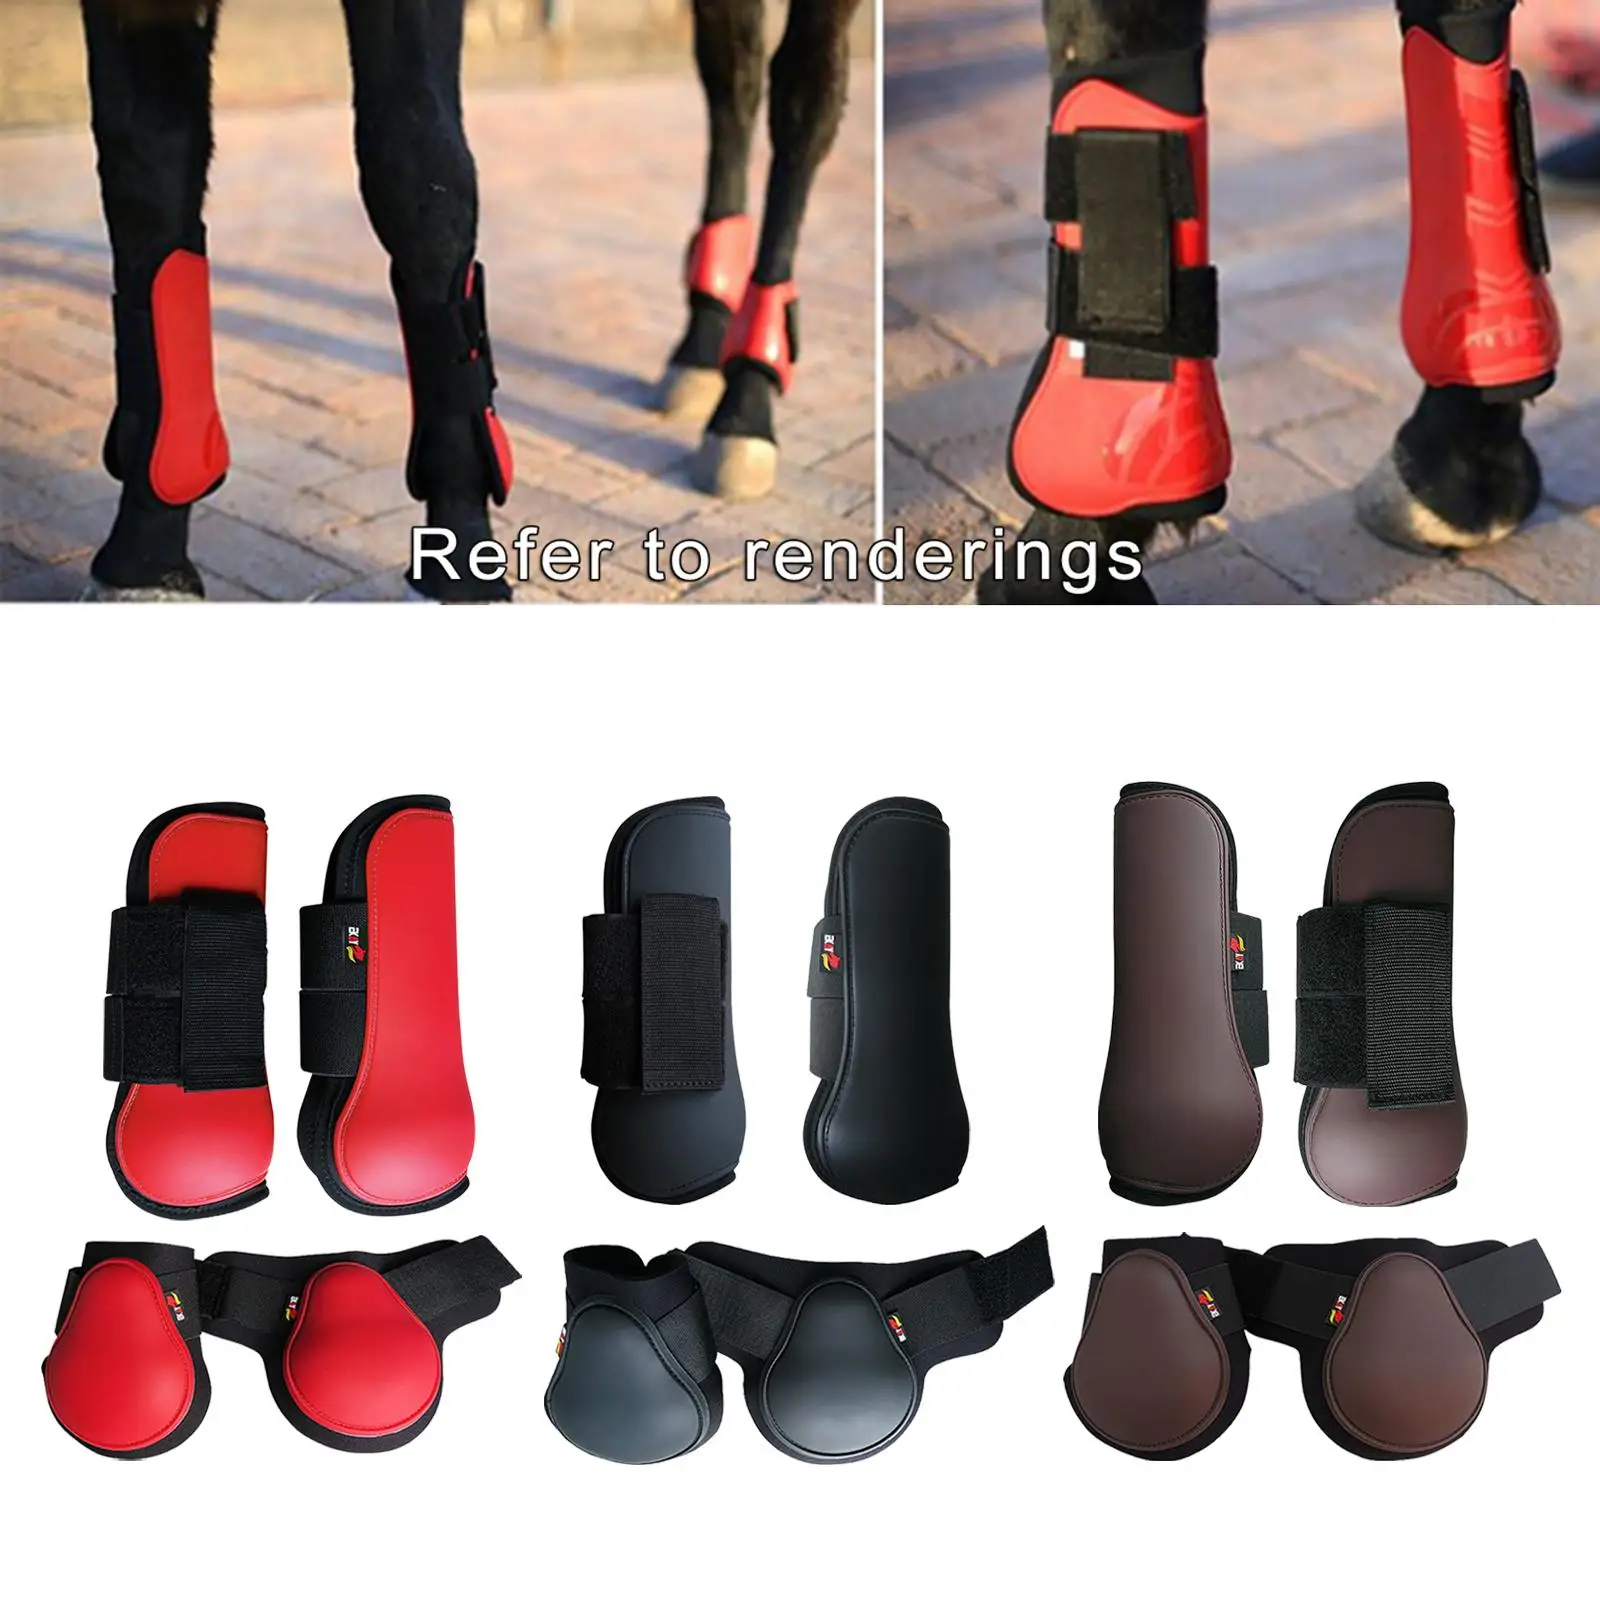 Front Hind Leg Boots Adjustable Horse Equine Guard Tendon Protection Guards